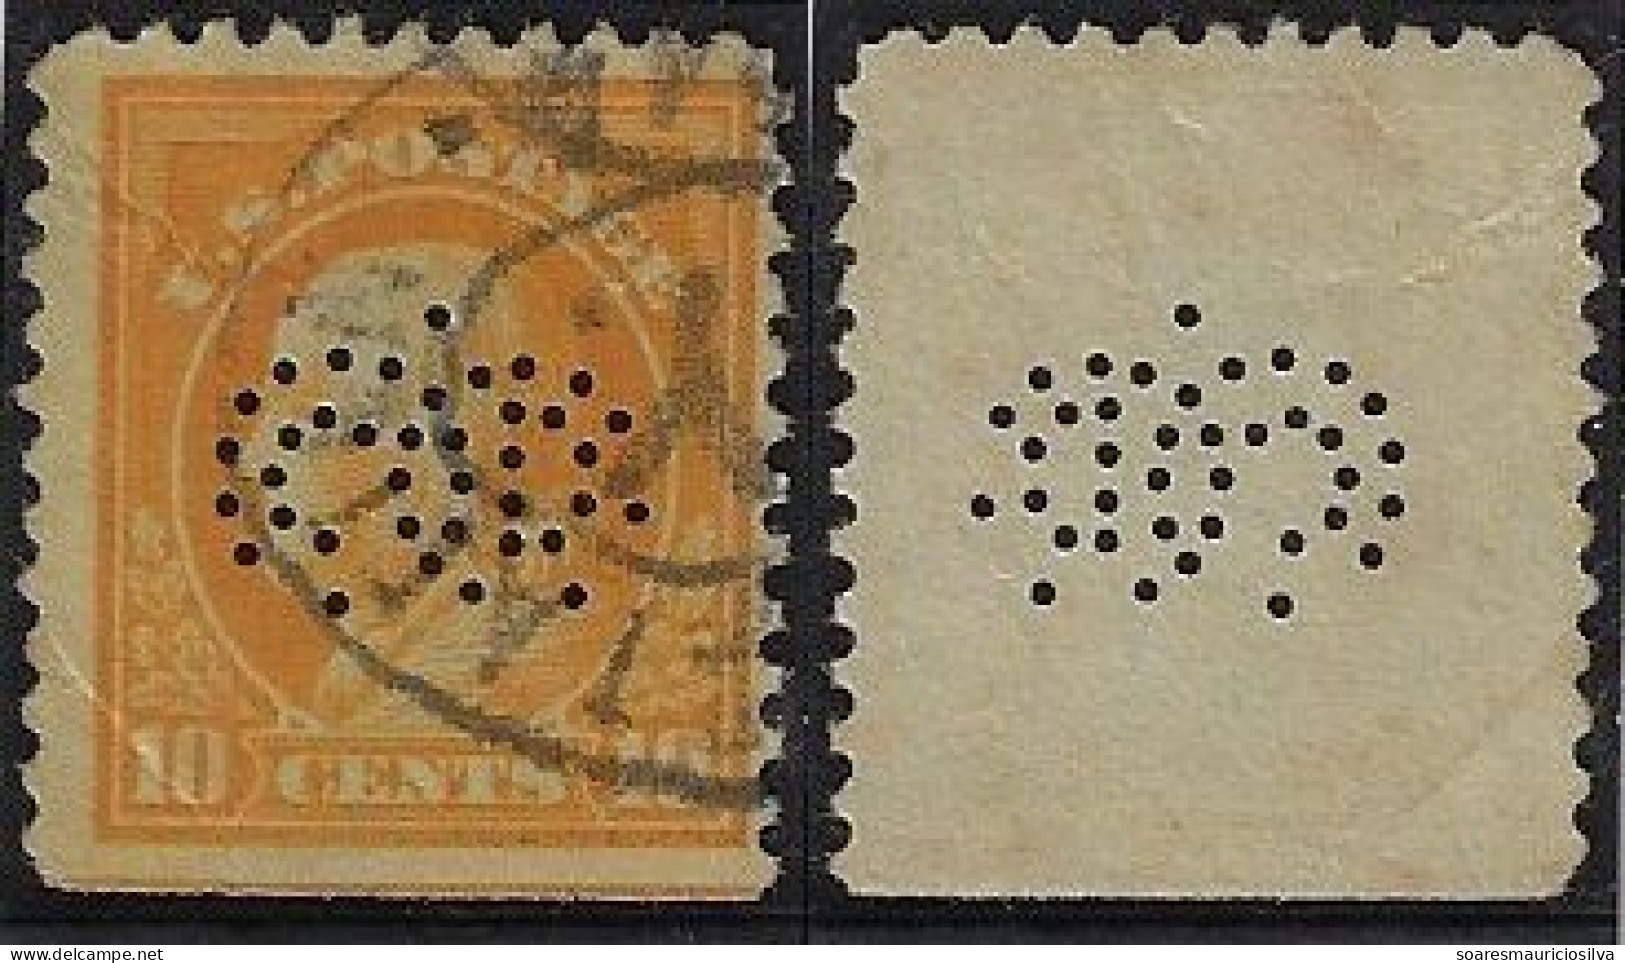 USA United States 1908/1917 Stamp With Perfin CD (circles) By Consolidated Dental Manufacturing Company Lochung Perfore - Perfin